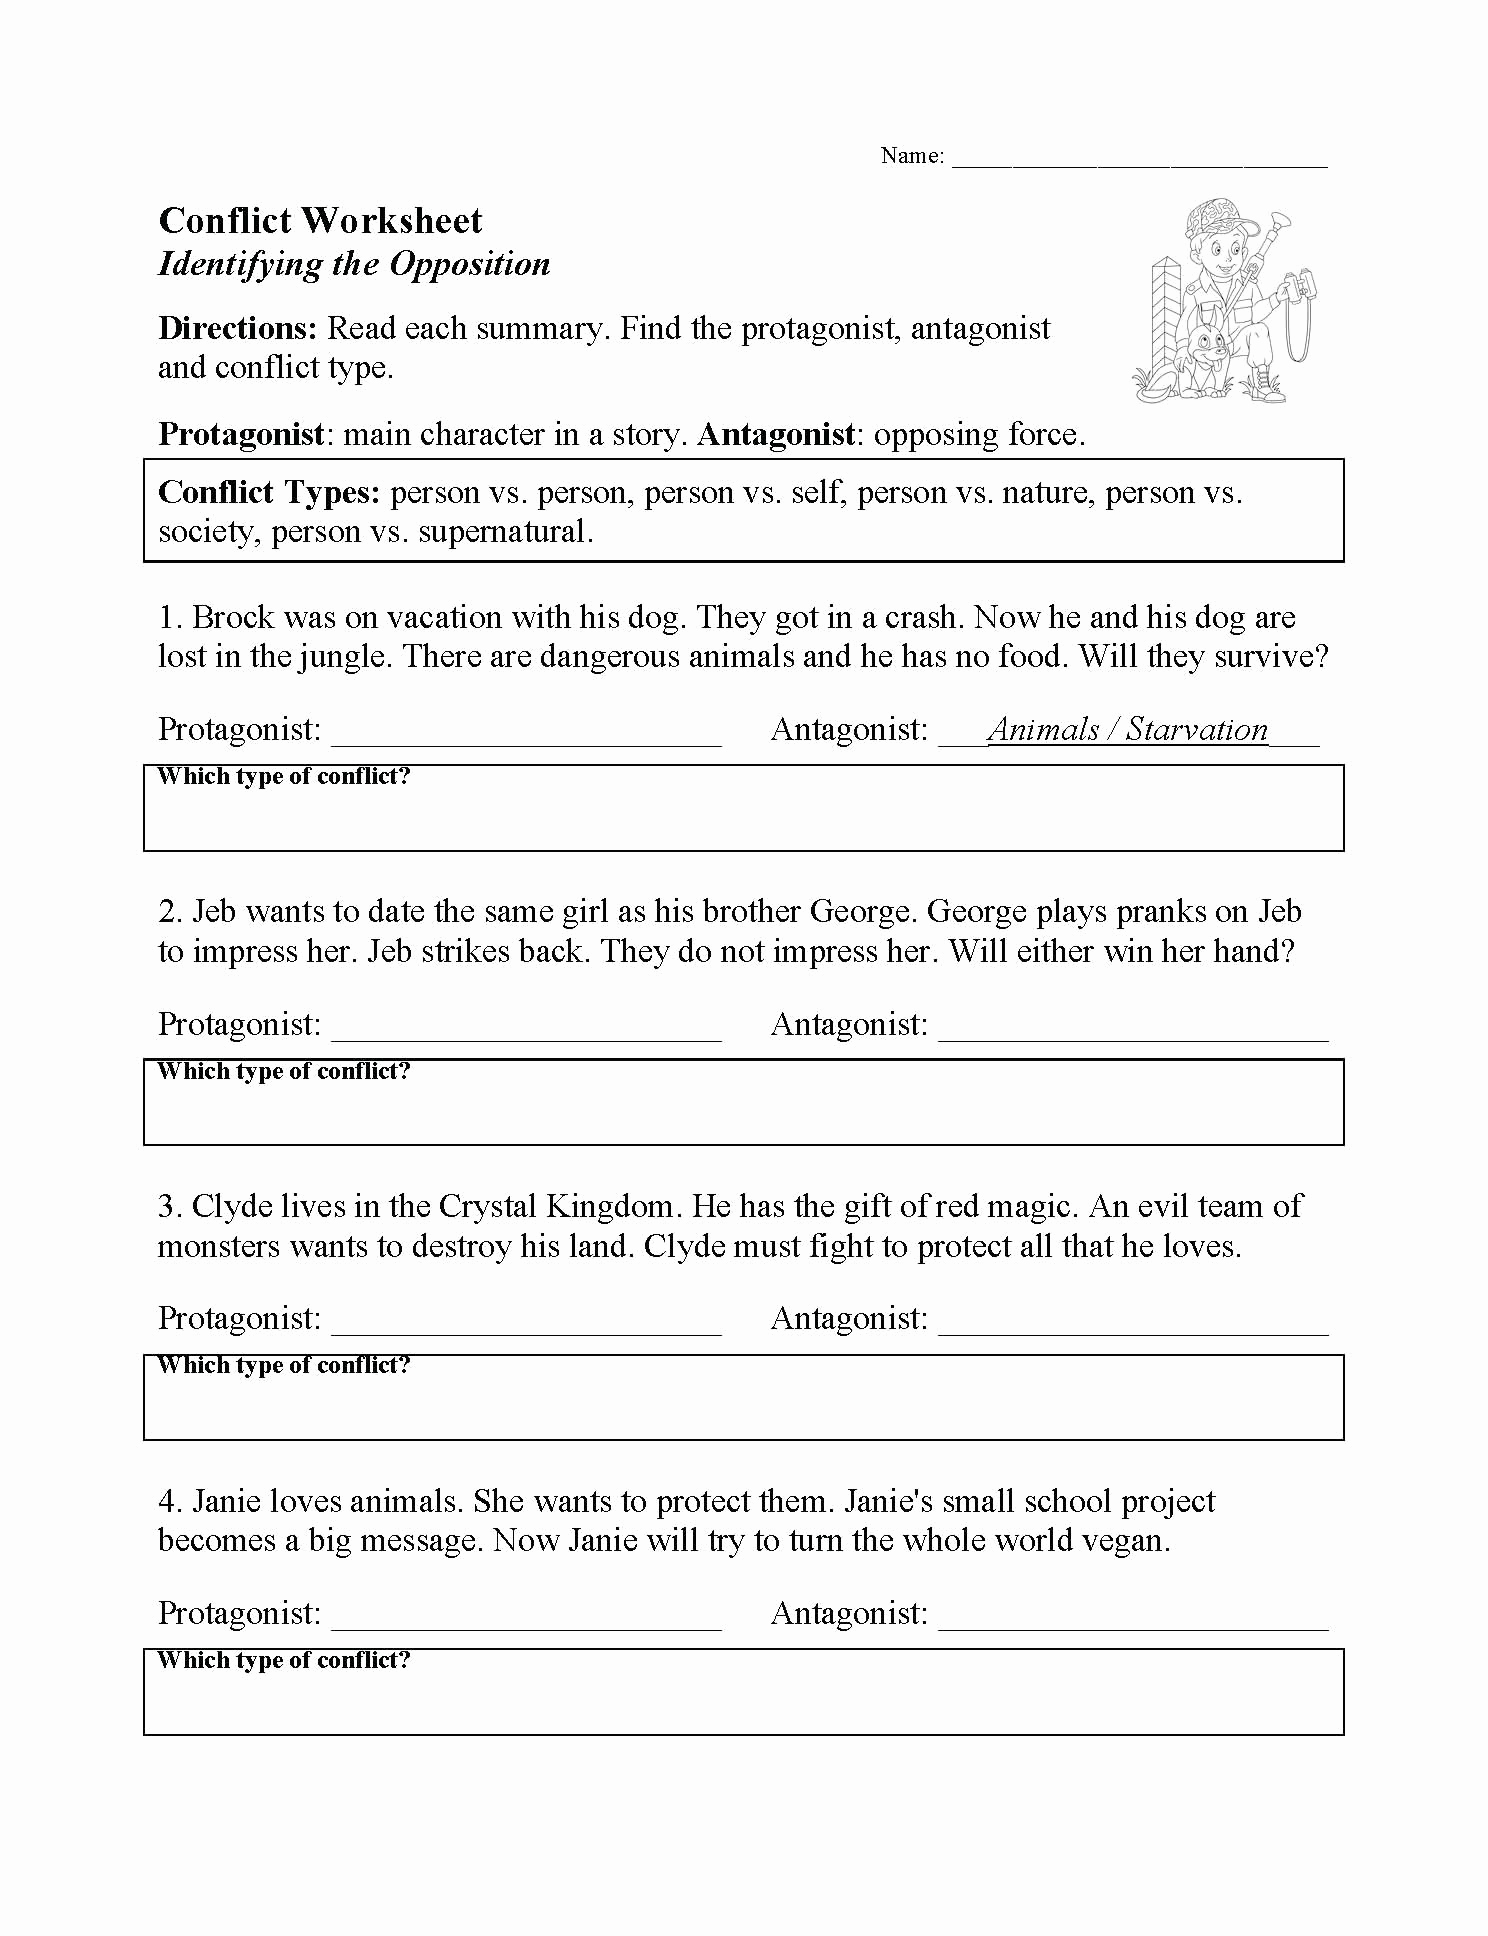 Conflict Worksheets Pdf Luxury 30 Types Conflict Worksheets